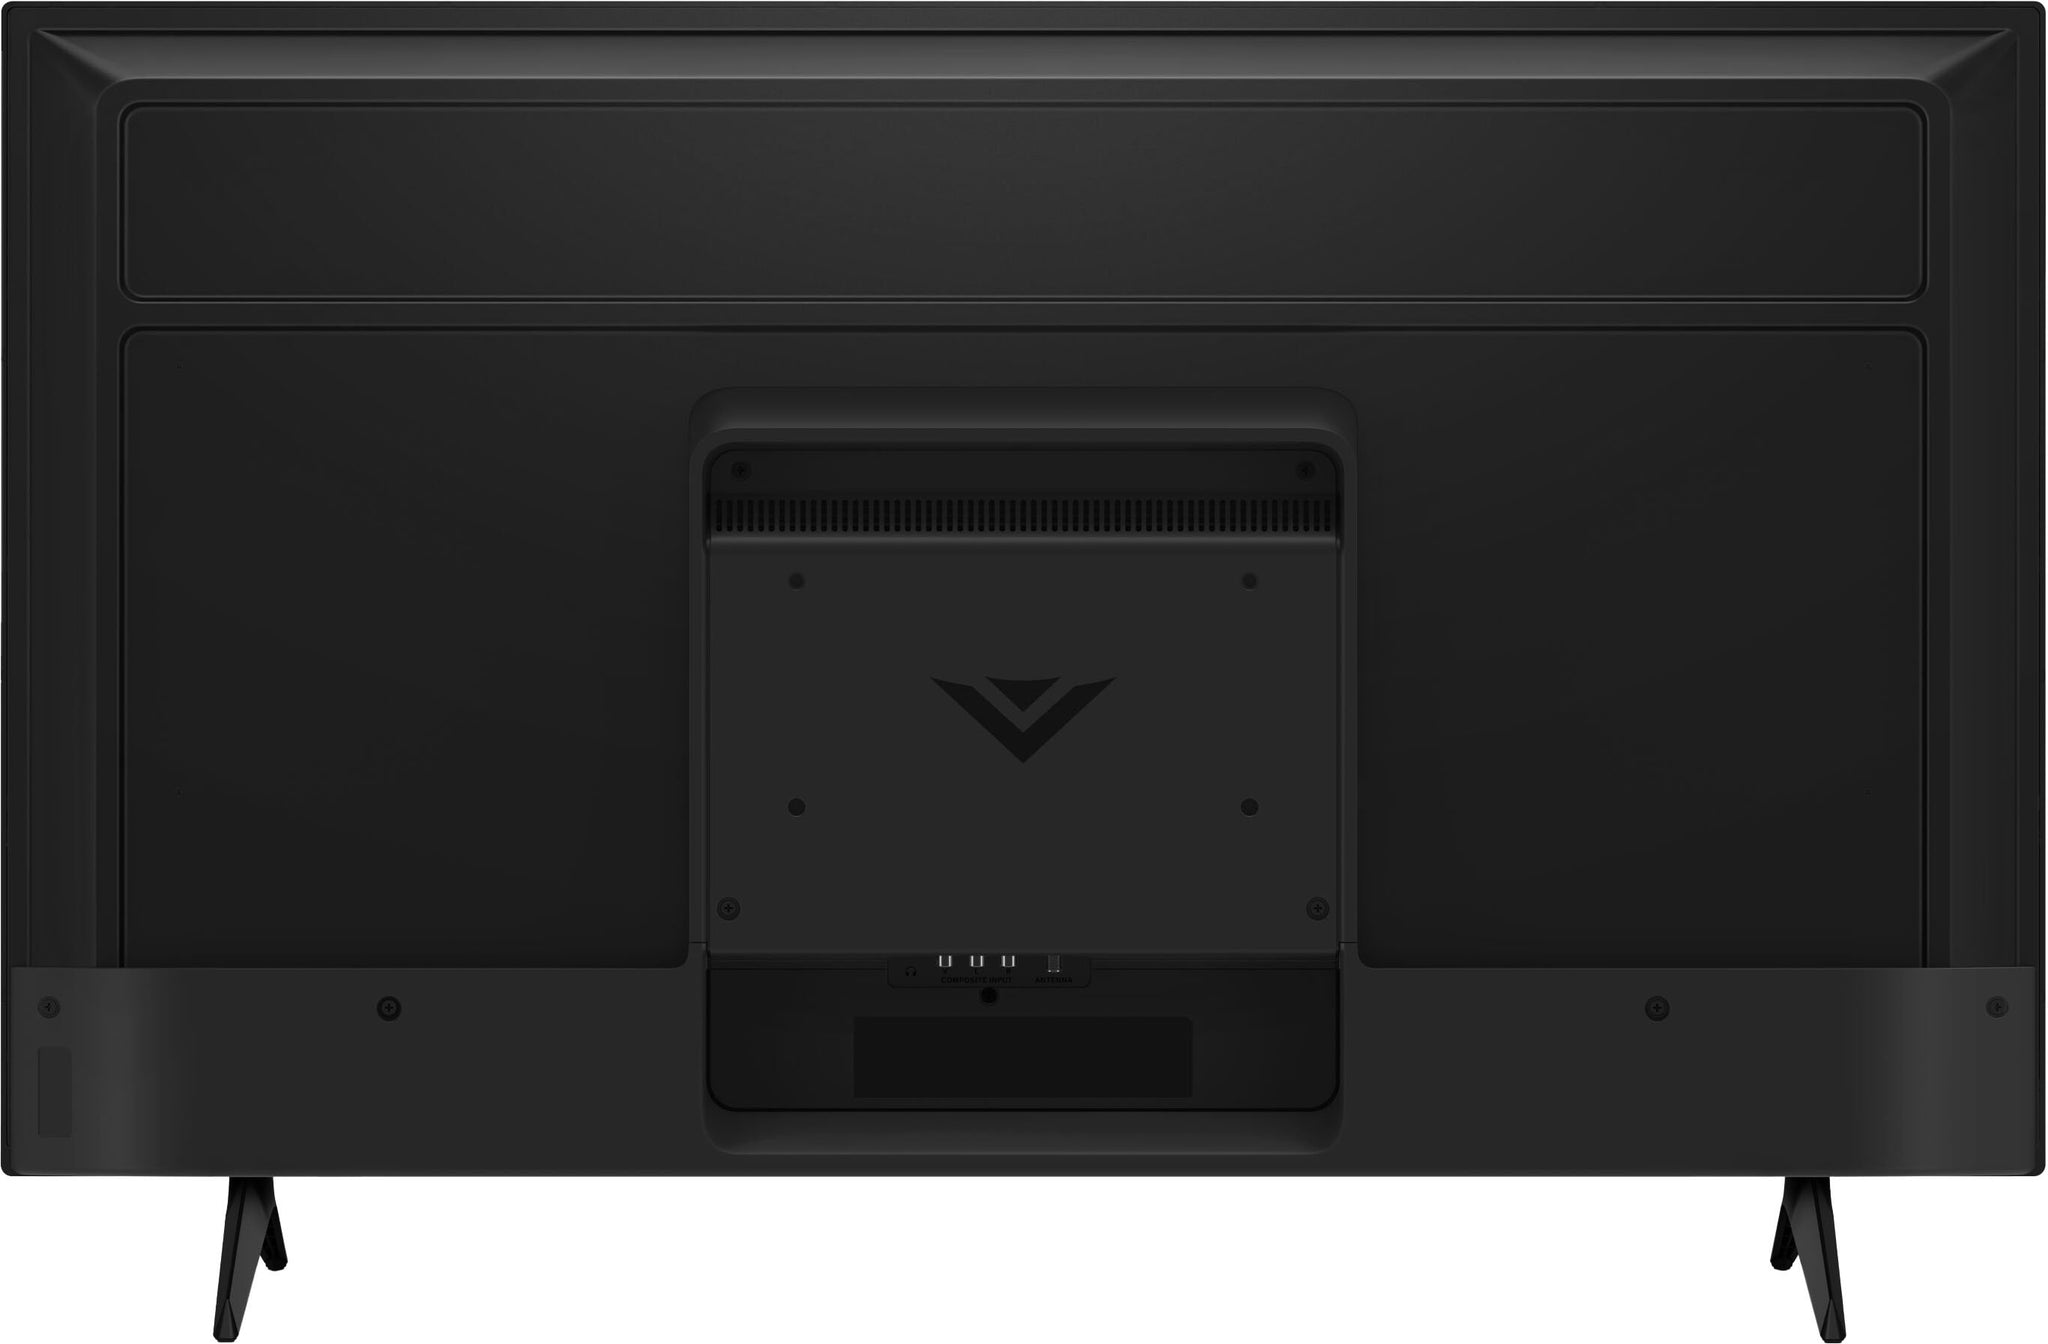 VIZIO 32" Class D-Series LED 720P Smart TV (Refurbished) Tv's ONLY for delivery in San Diego and Tijuana